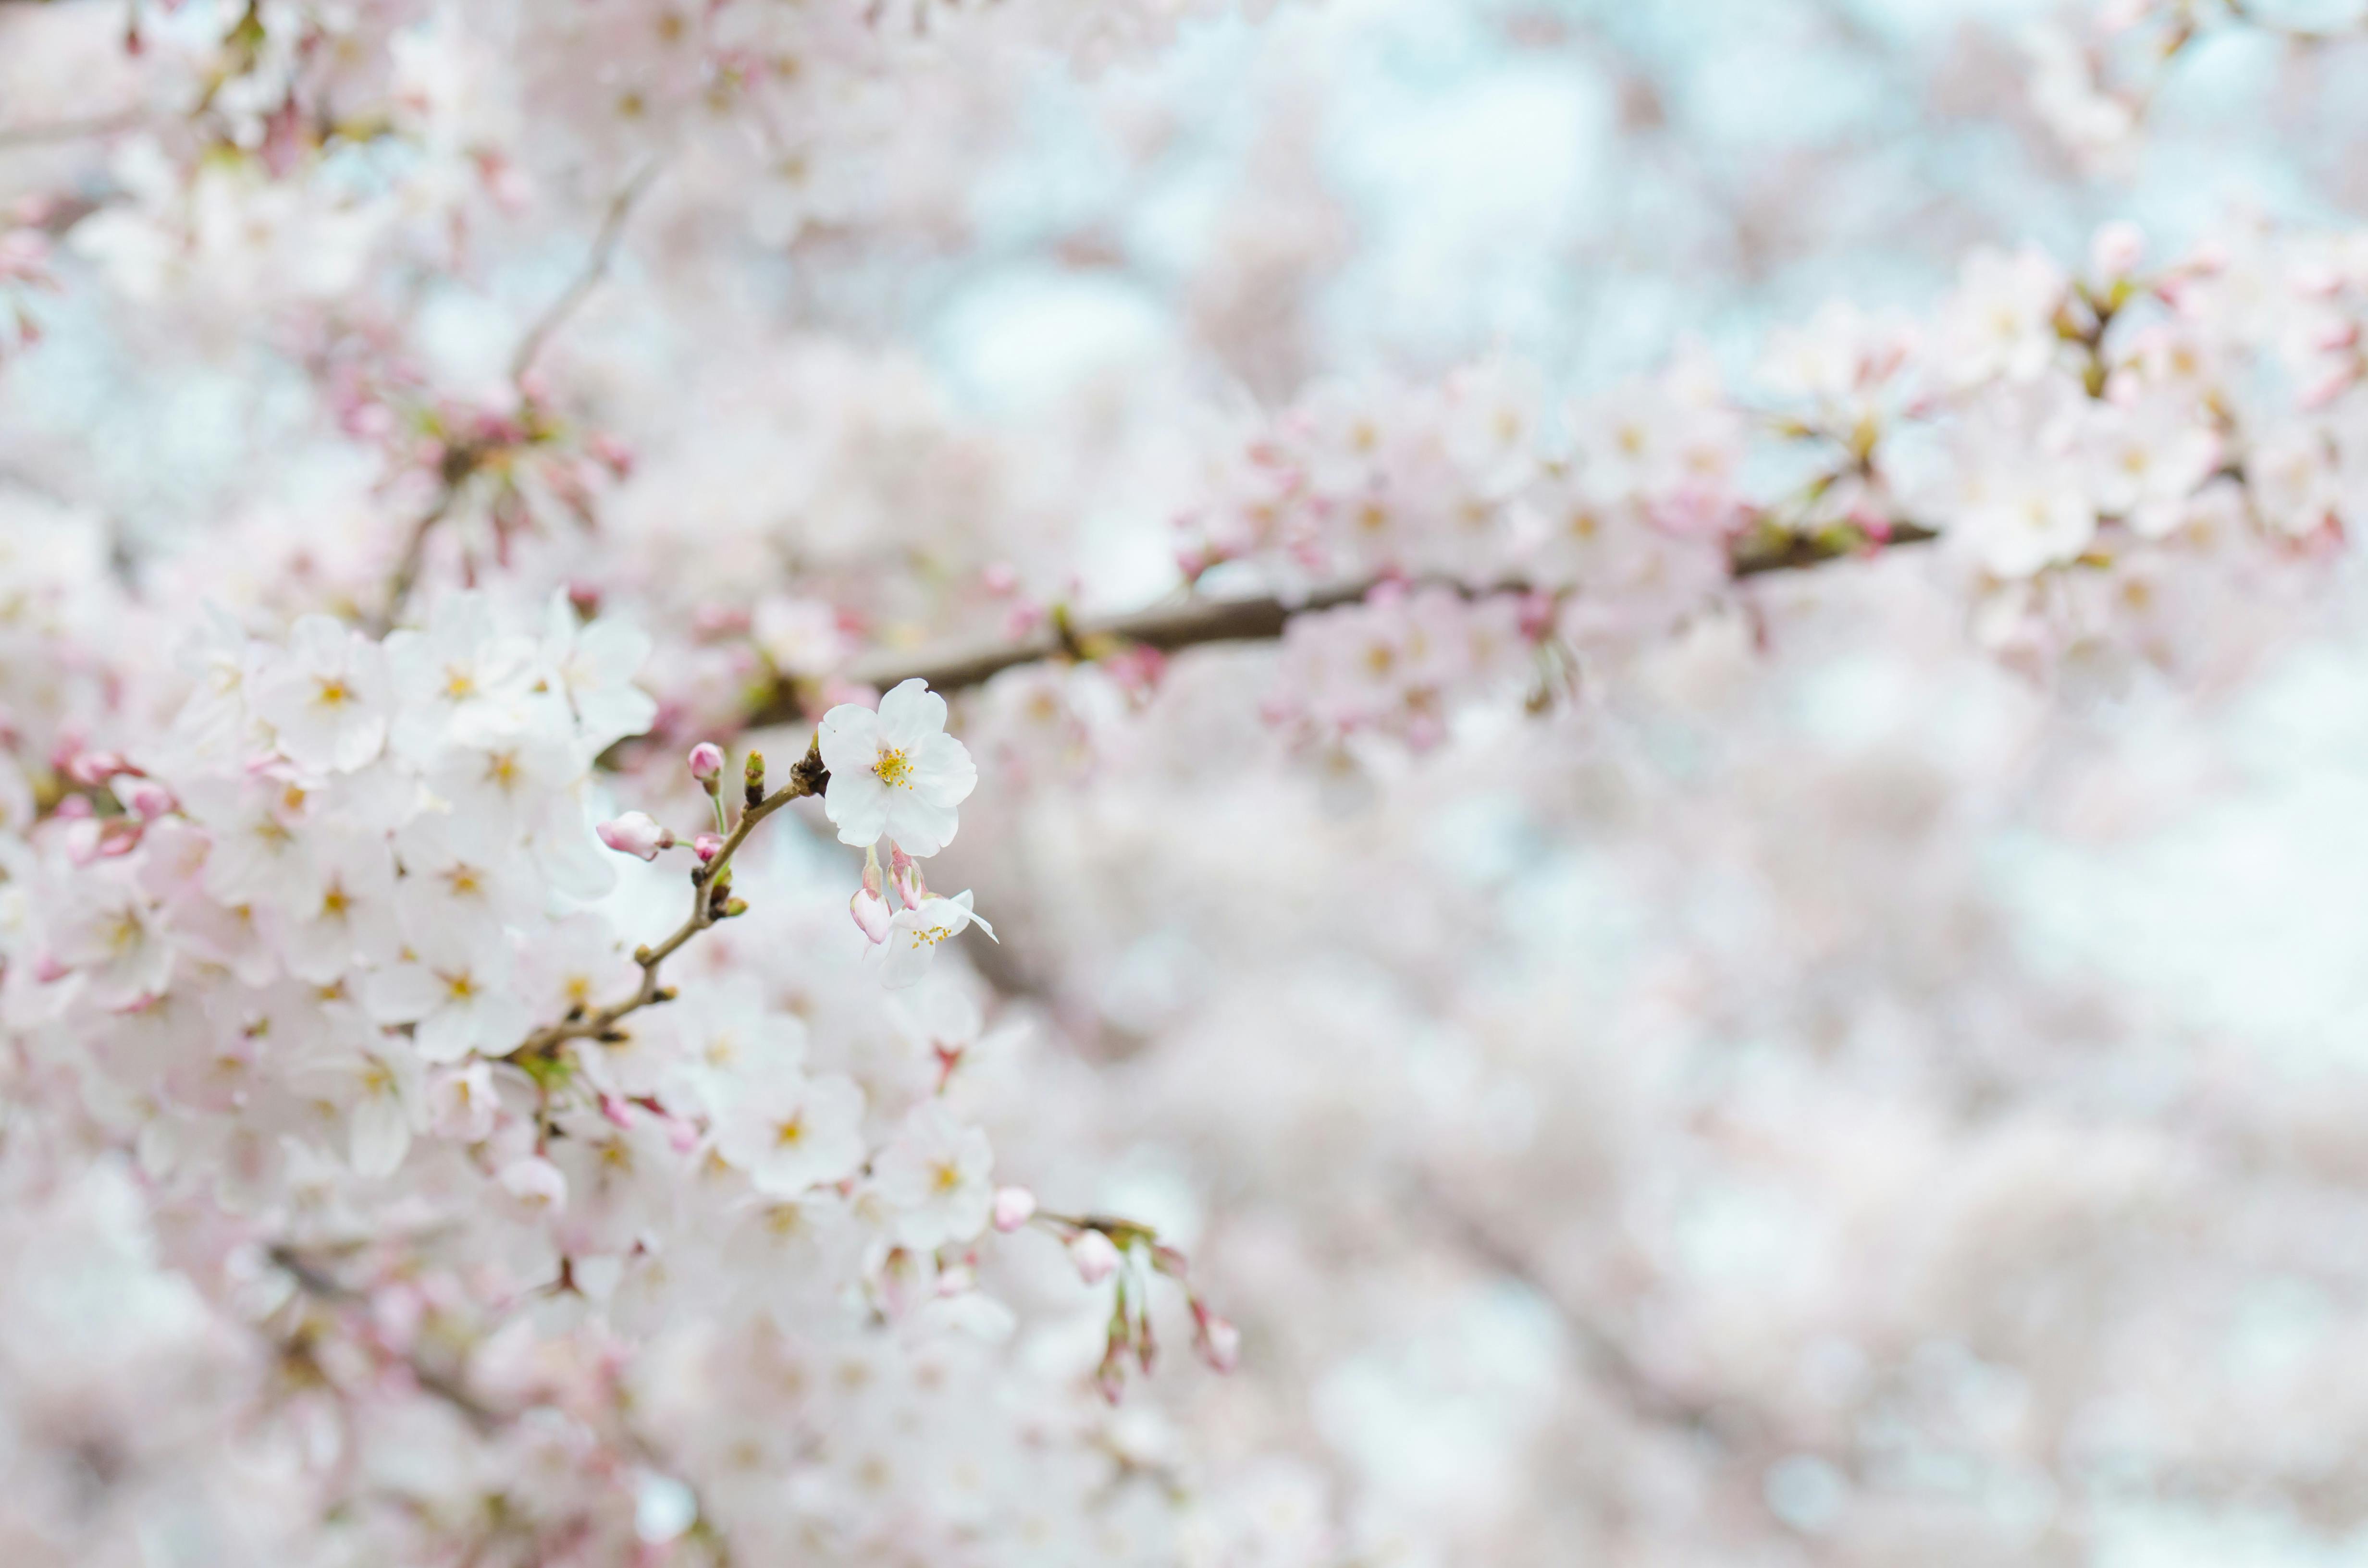 cherrytree notes change background color to white